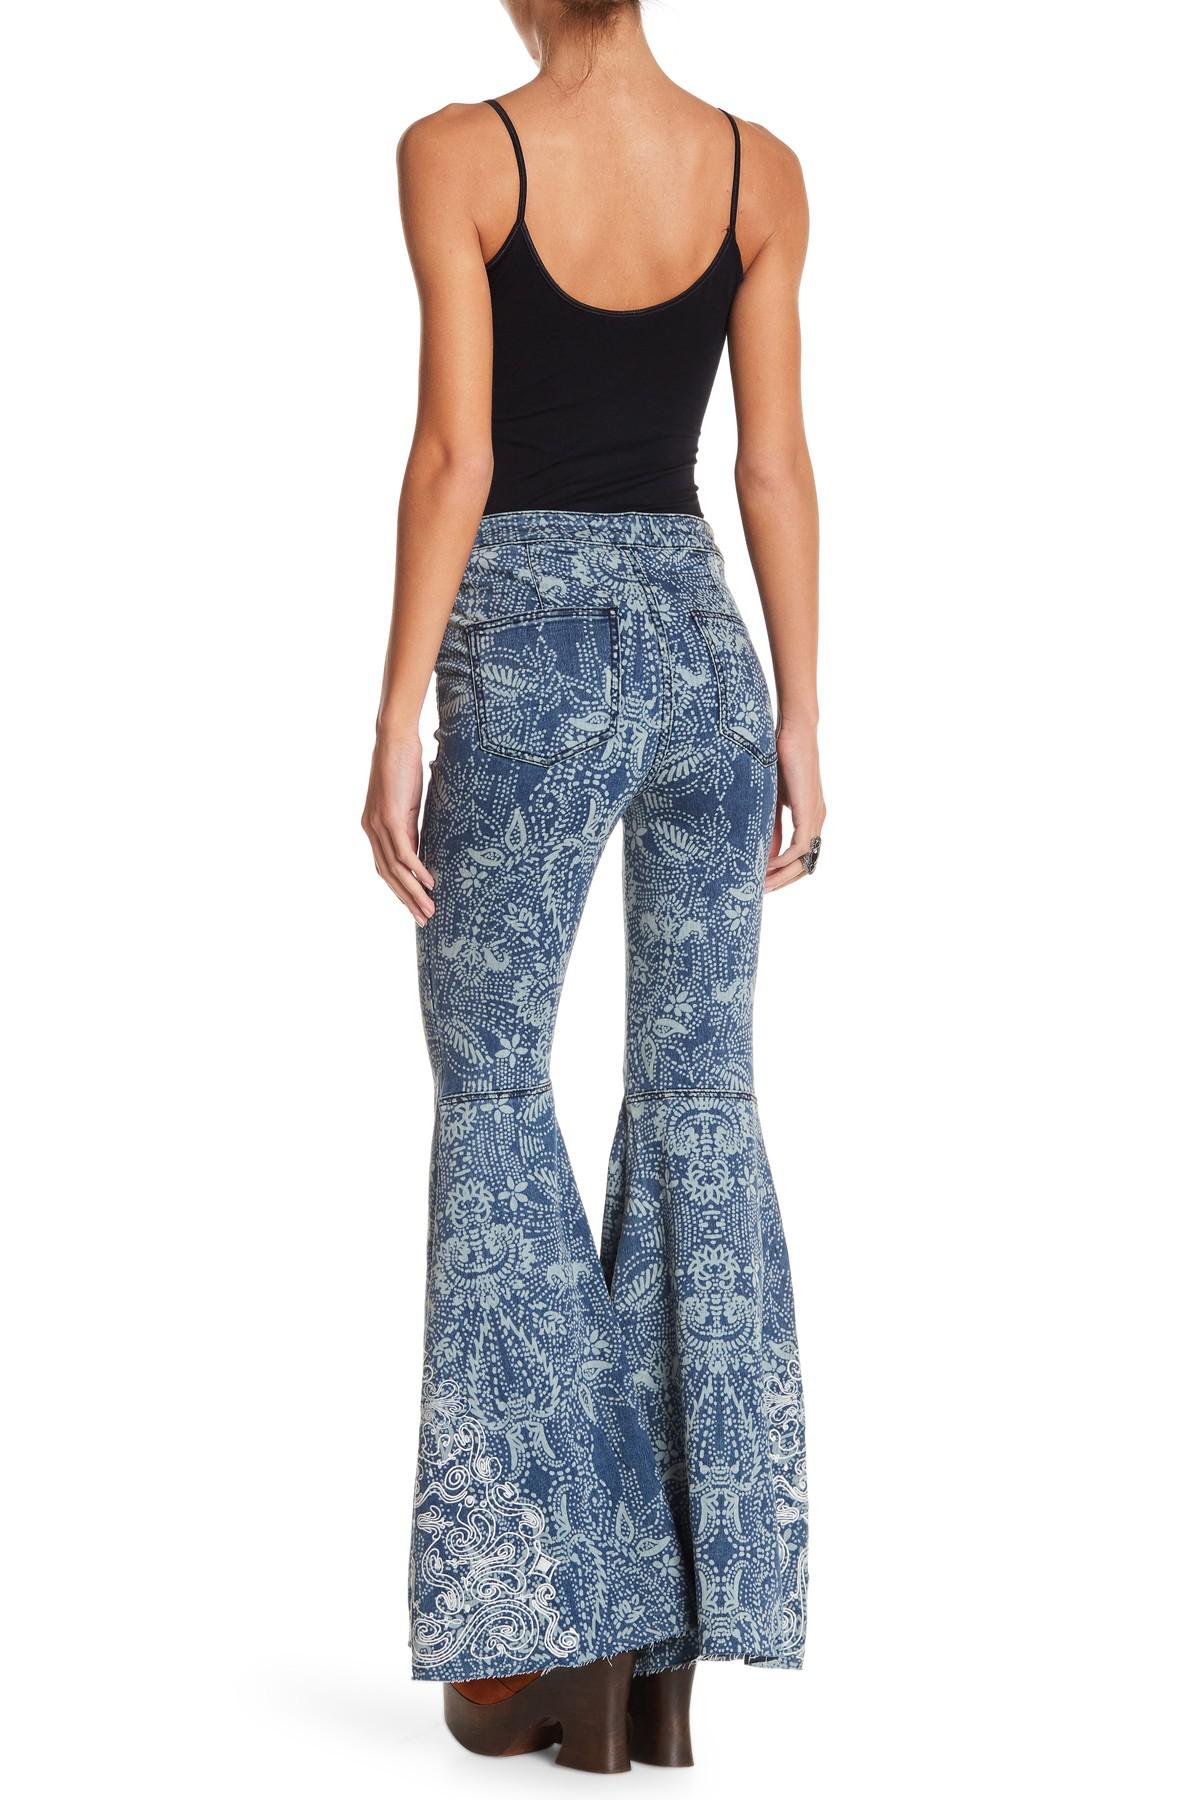 Lyst - Free People Embroidered Bell Bottom Jeans in Blue